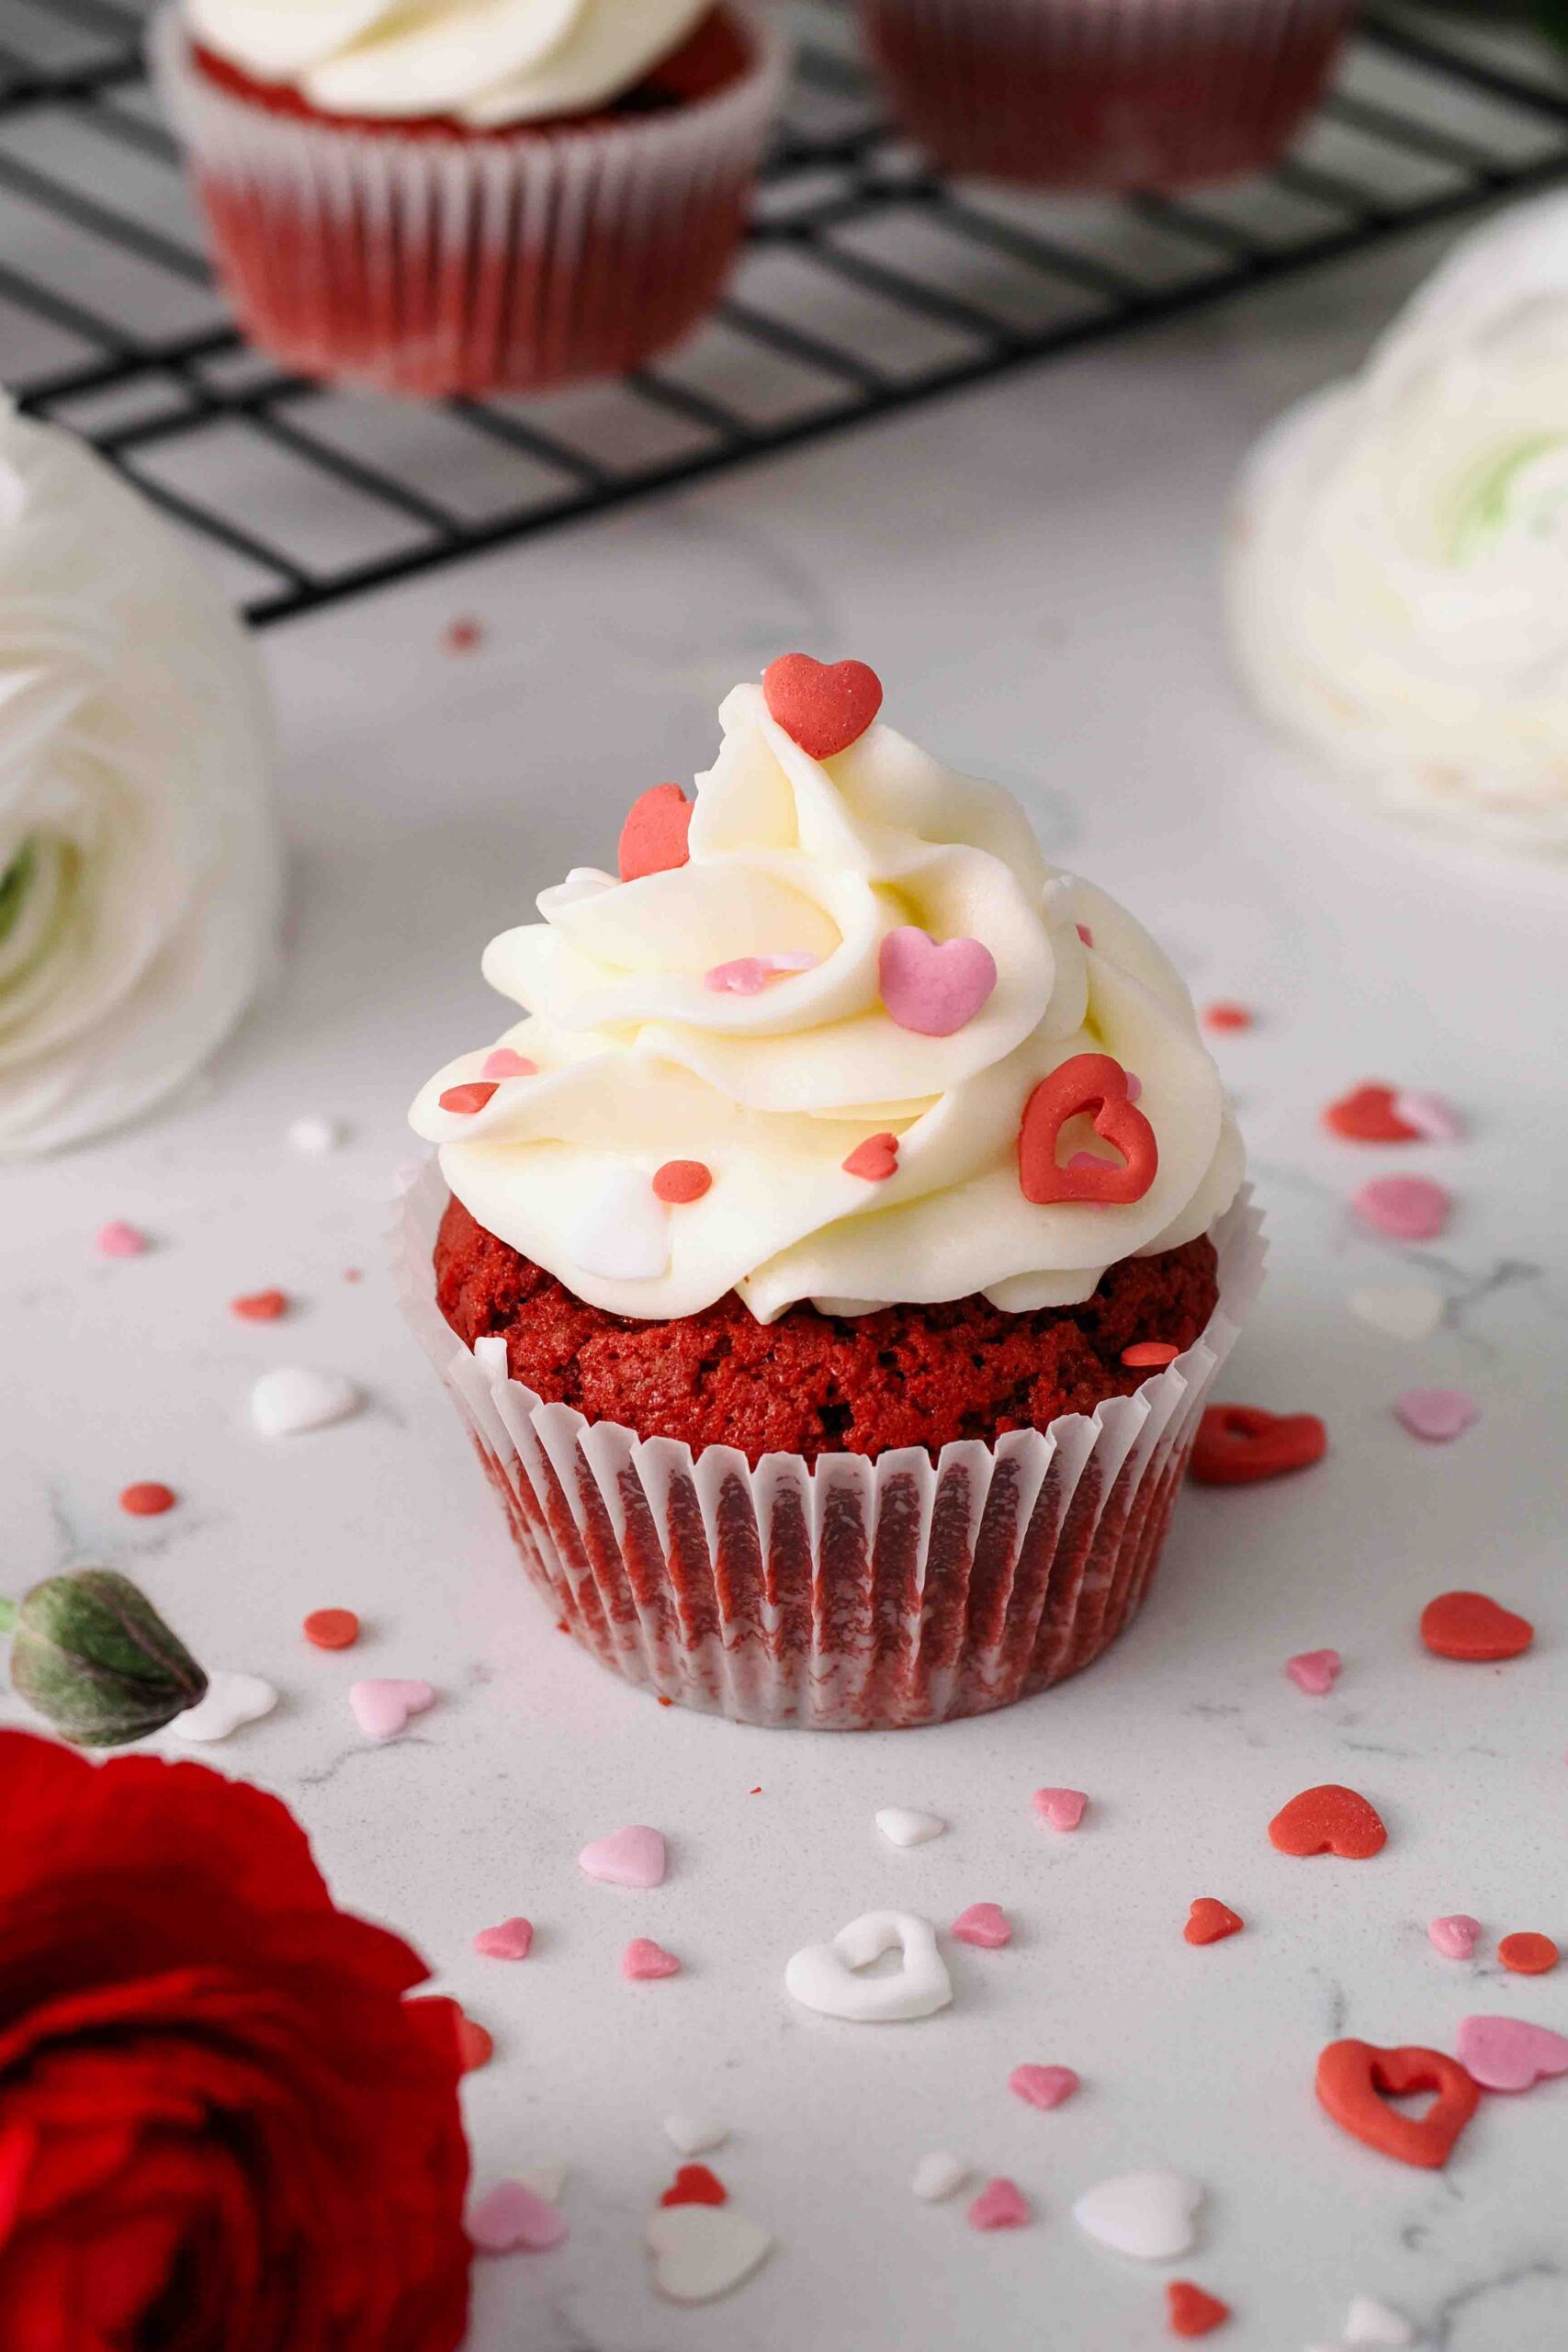 A red velvet cupcake is topped with red, pink, and white heart sprinkles near a red ranunculus flower.